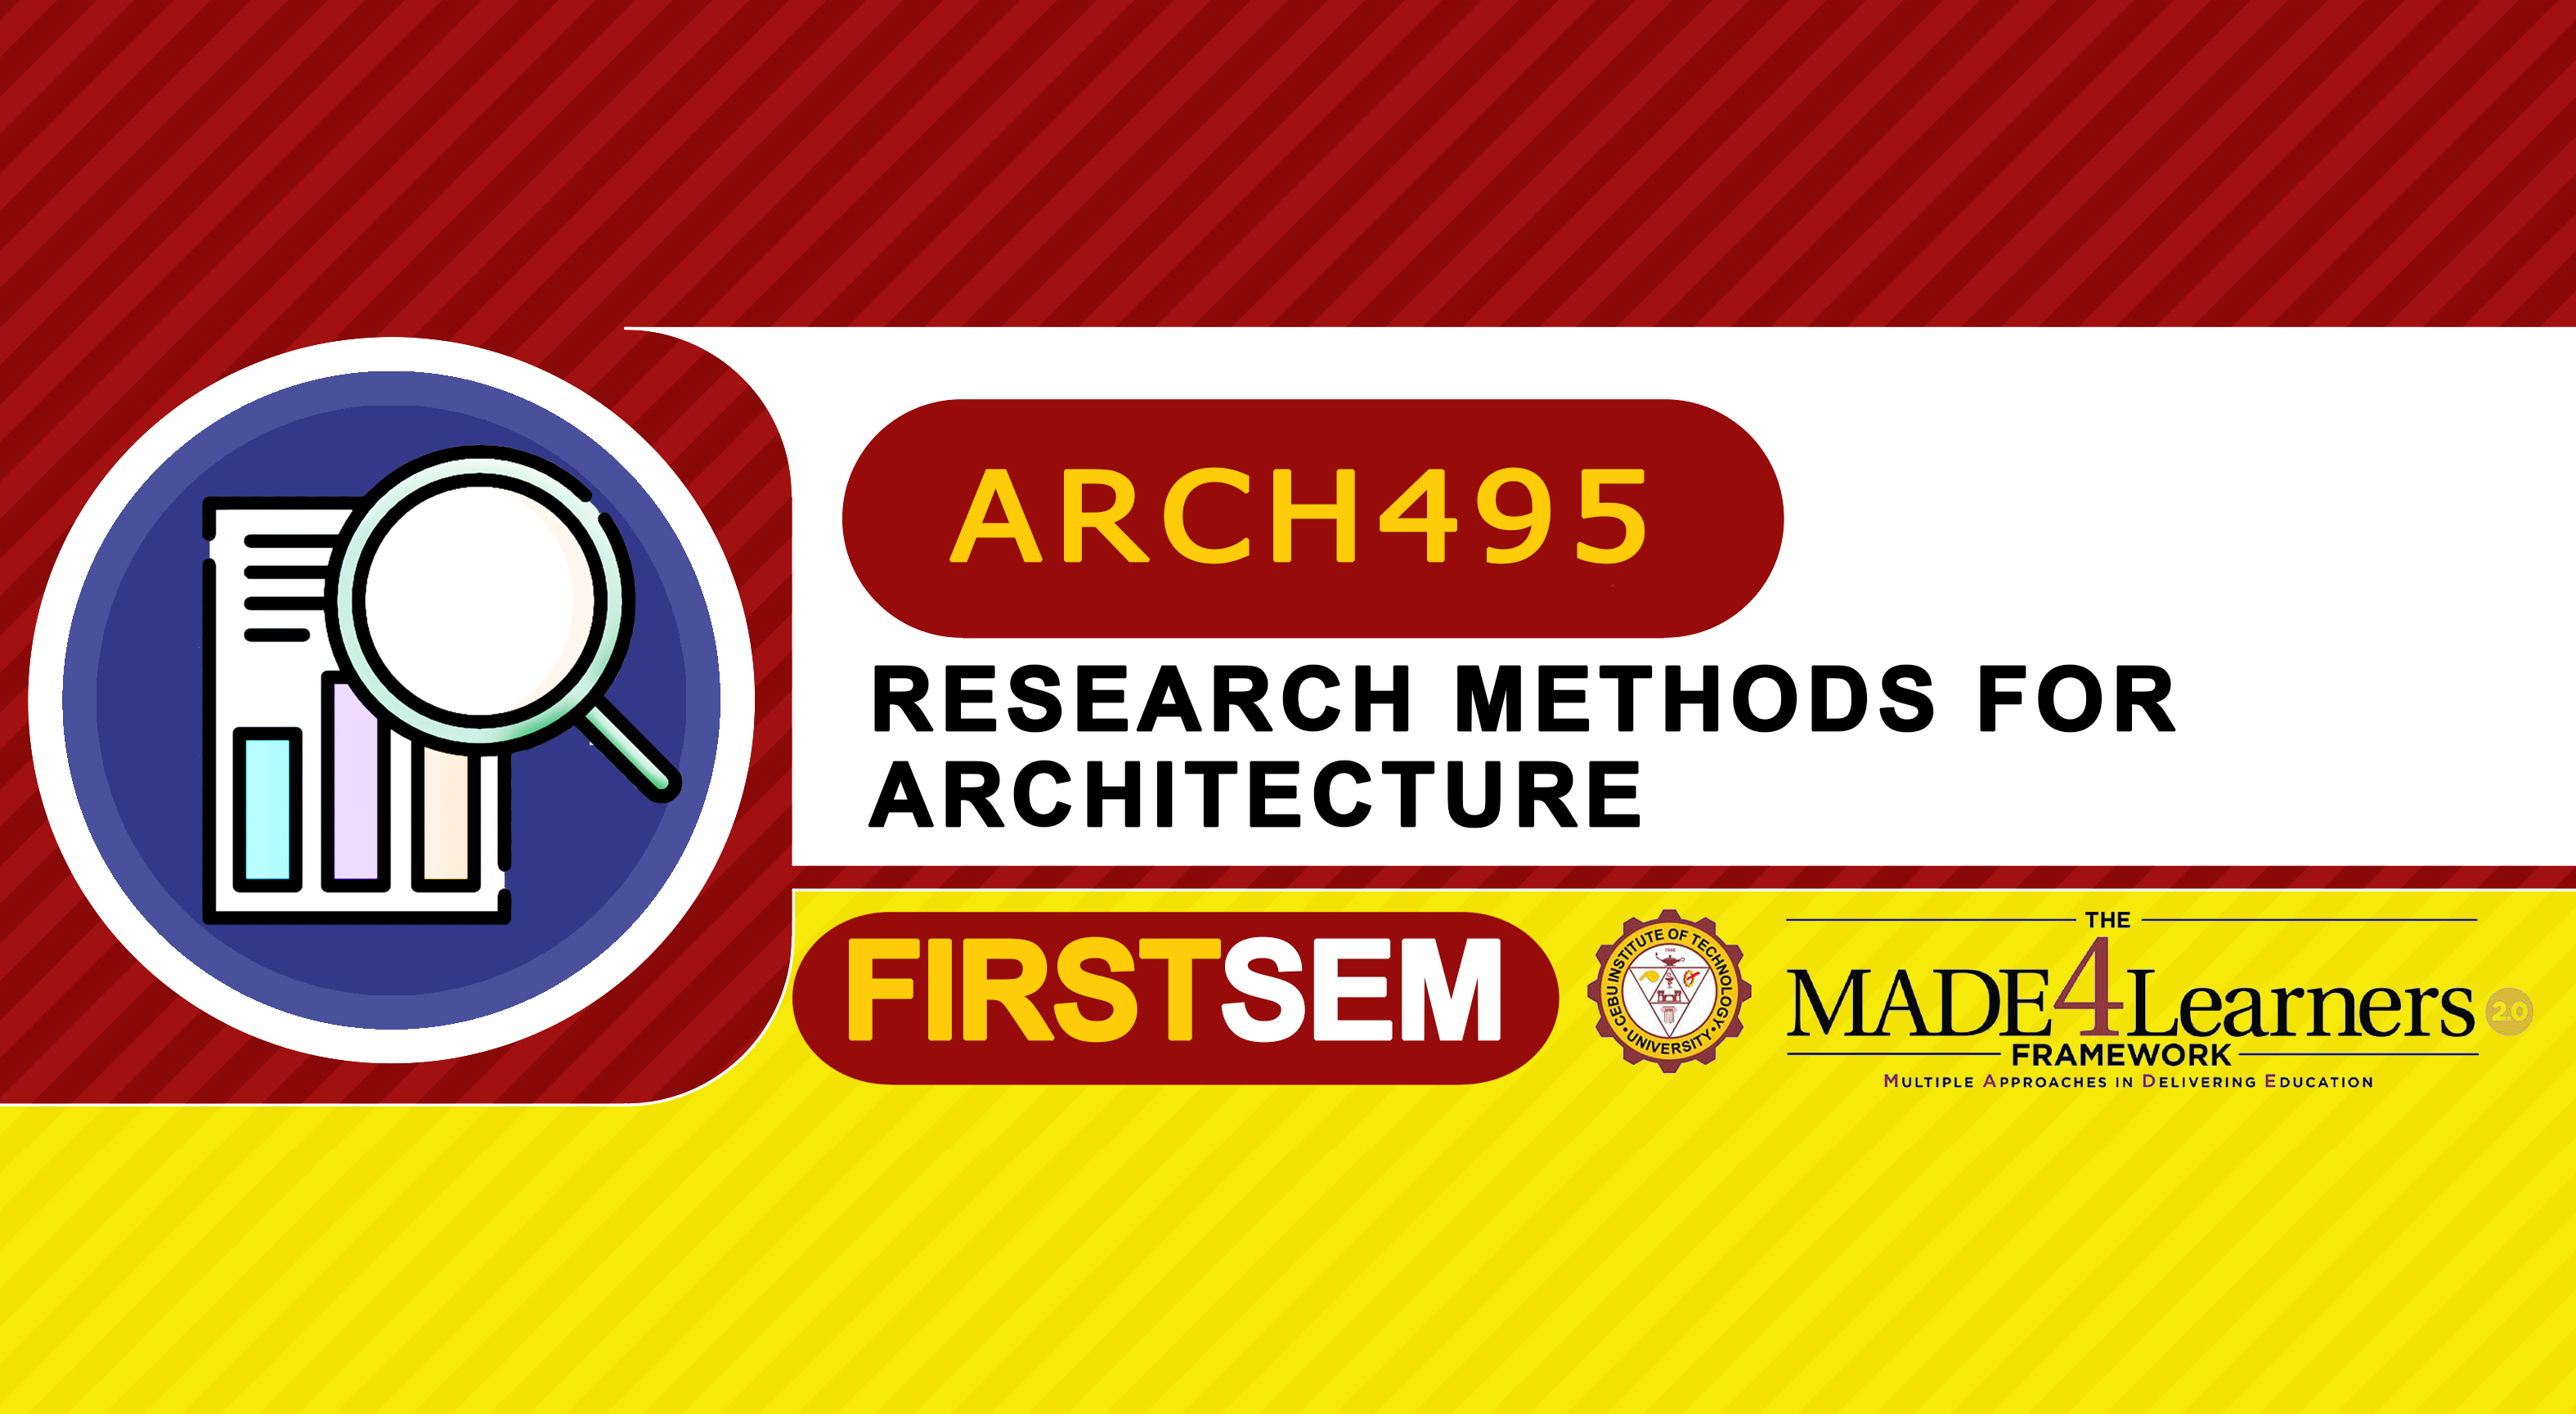 ARCH495: RESEARCH METHODS FOR ARCHITECTURE